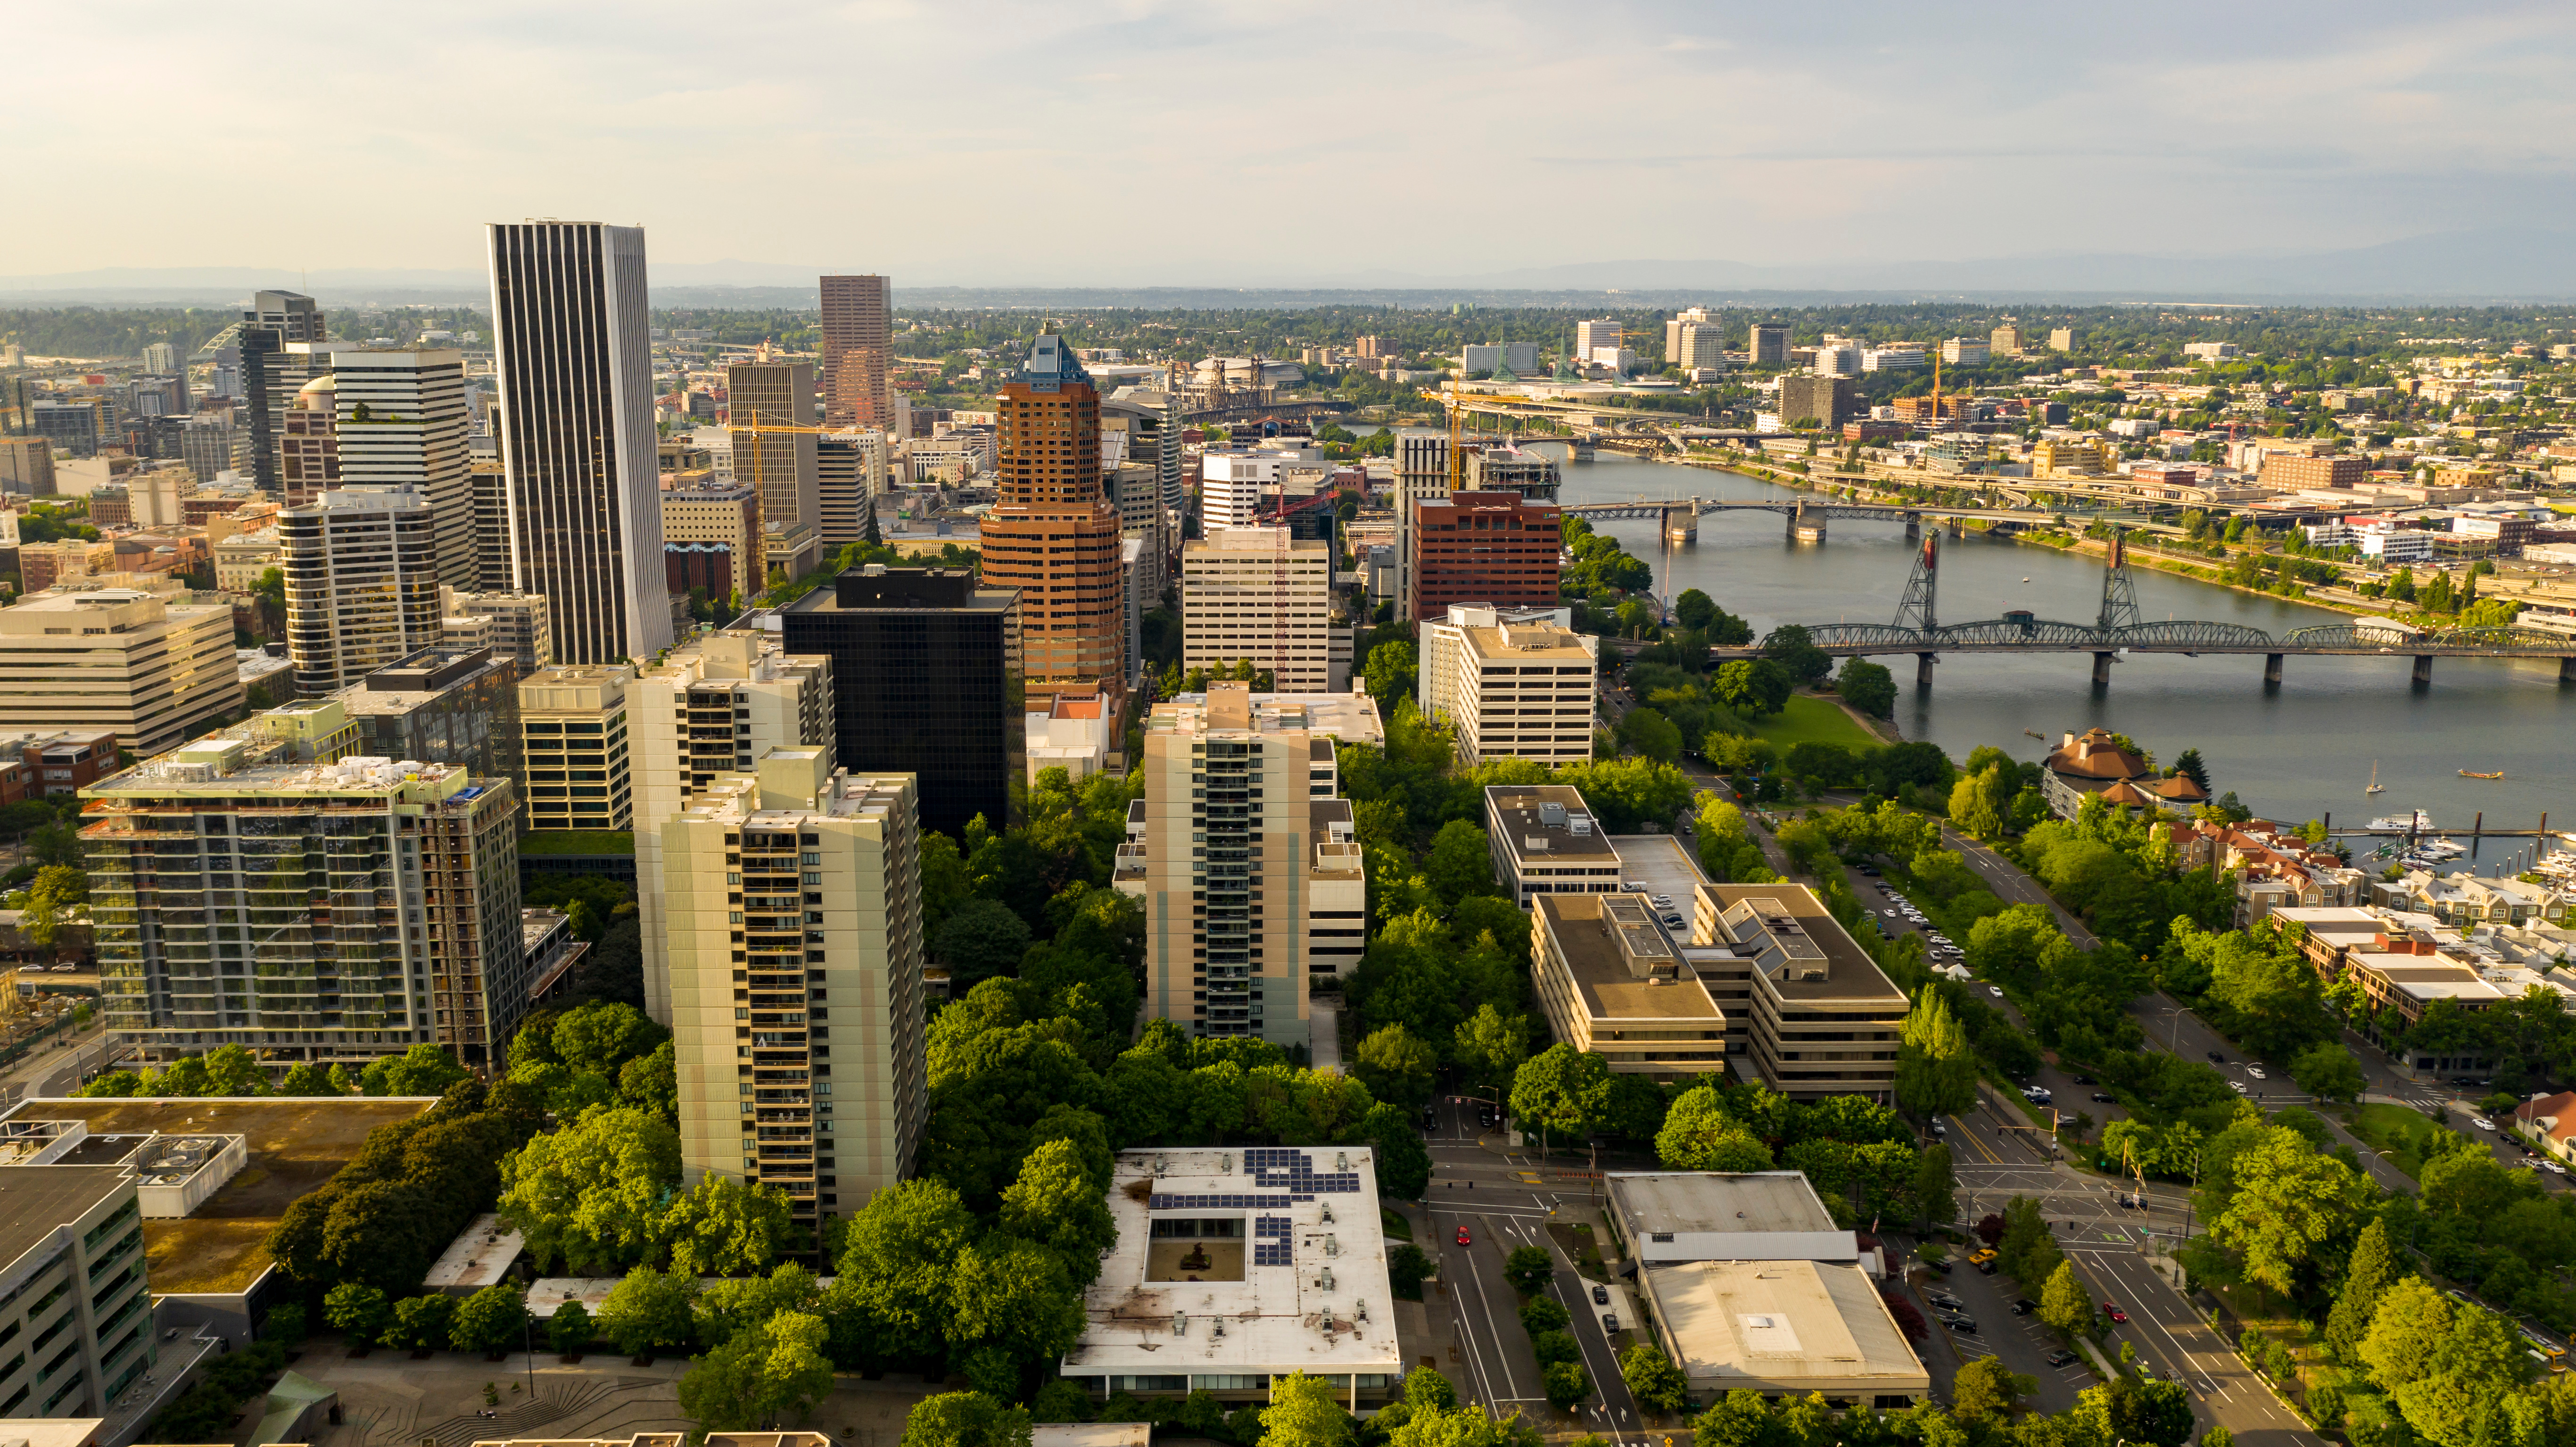 Done overhead shot of downtown Portland and bridges